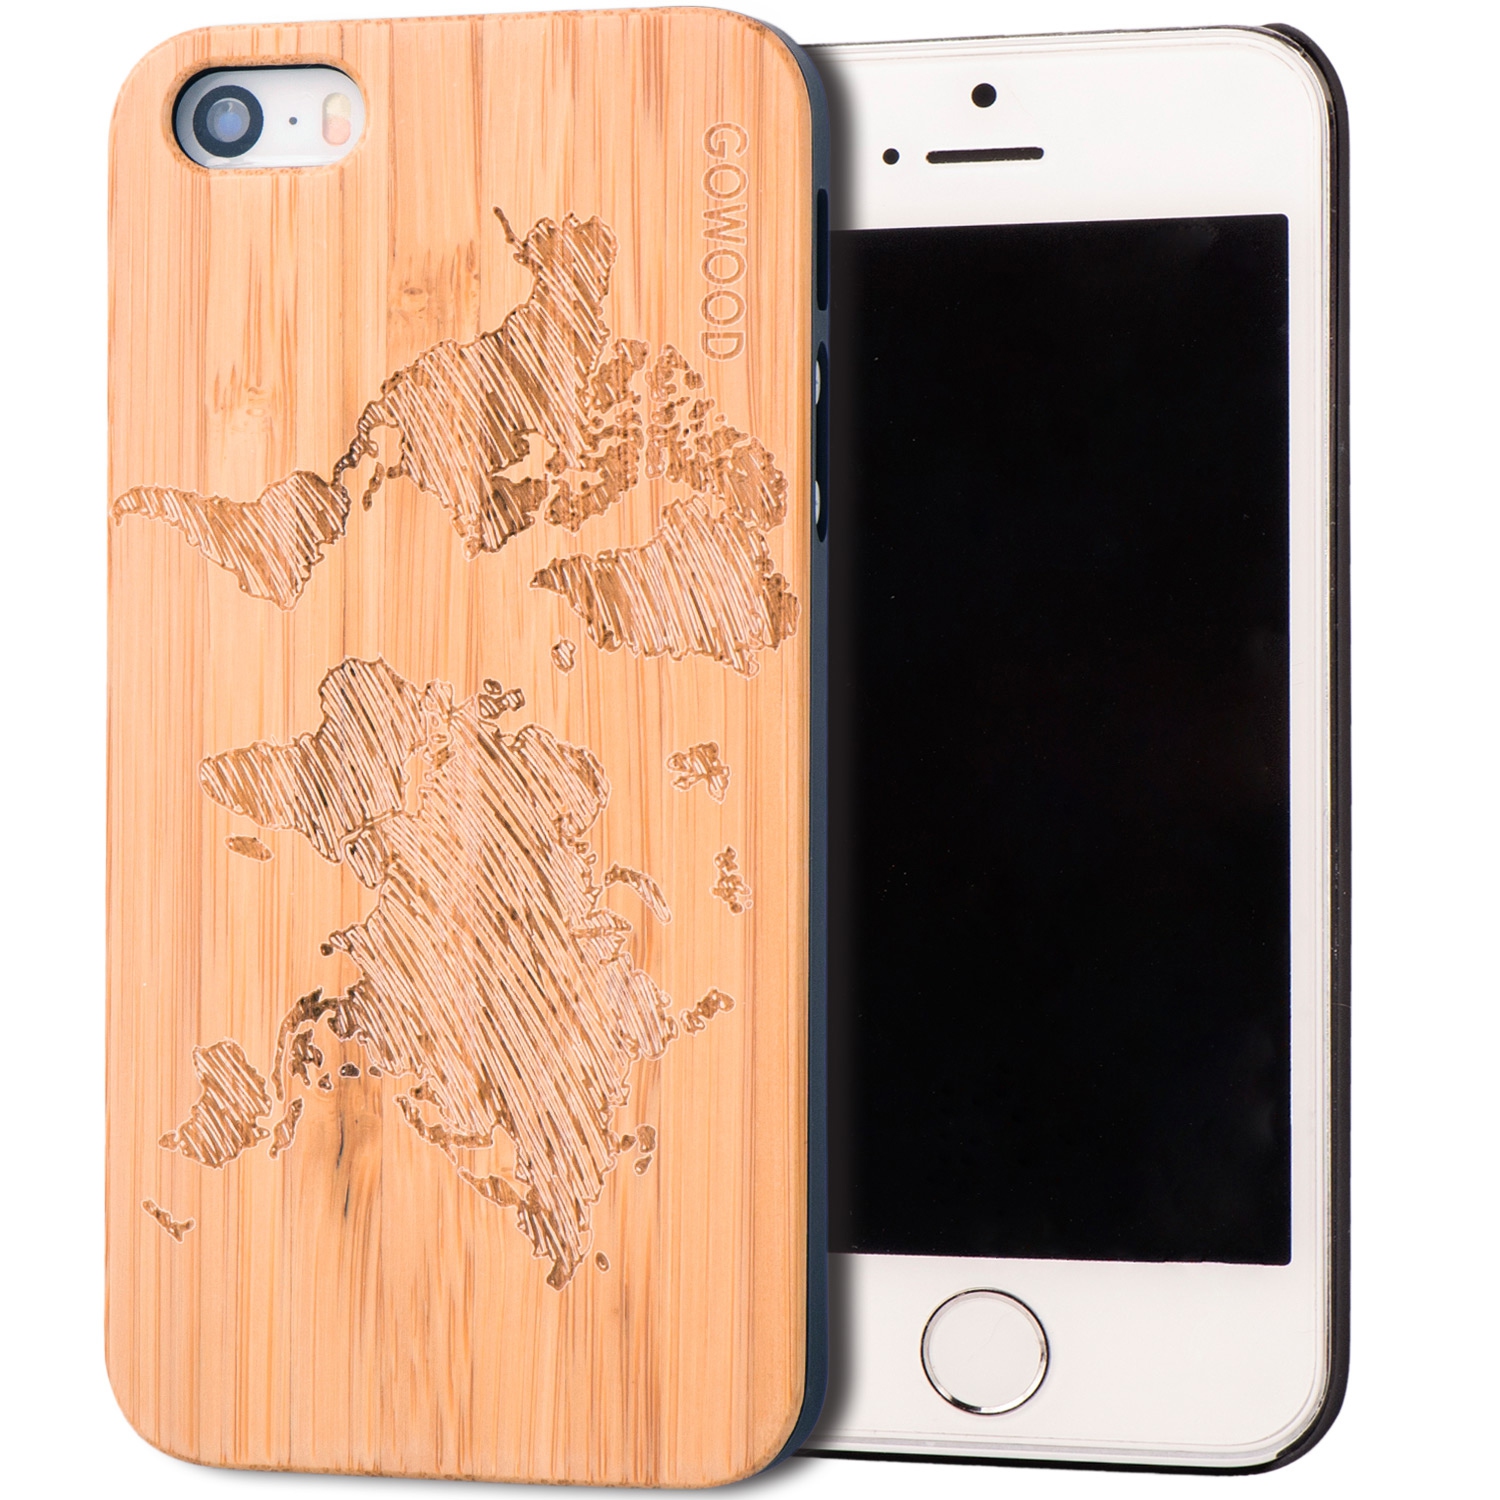 iPhone 5 / 5S / SE Wood Case | Bamboo World Map Design Engraved & Durable Polycarbonate Shockproof Bumper with Rubber Coating